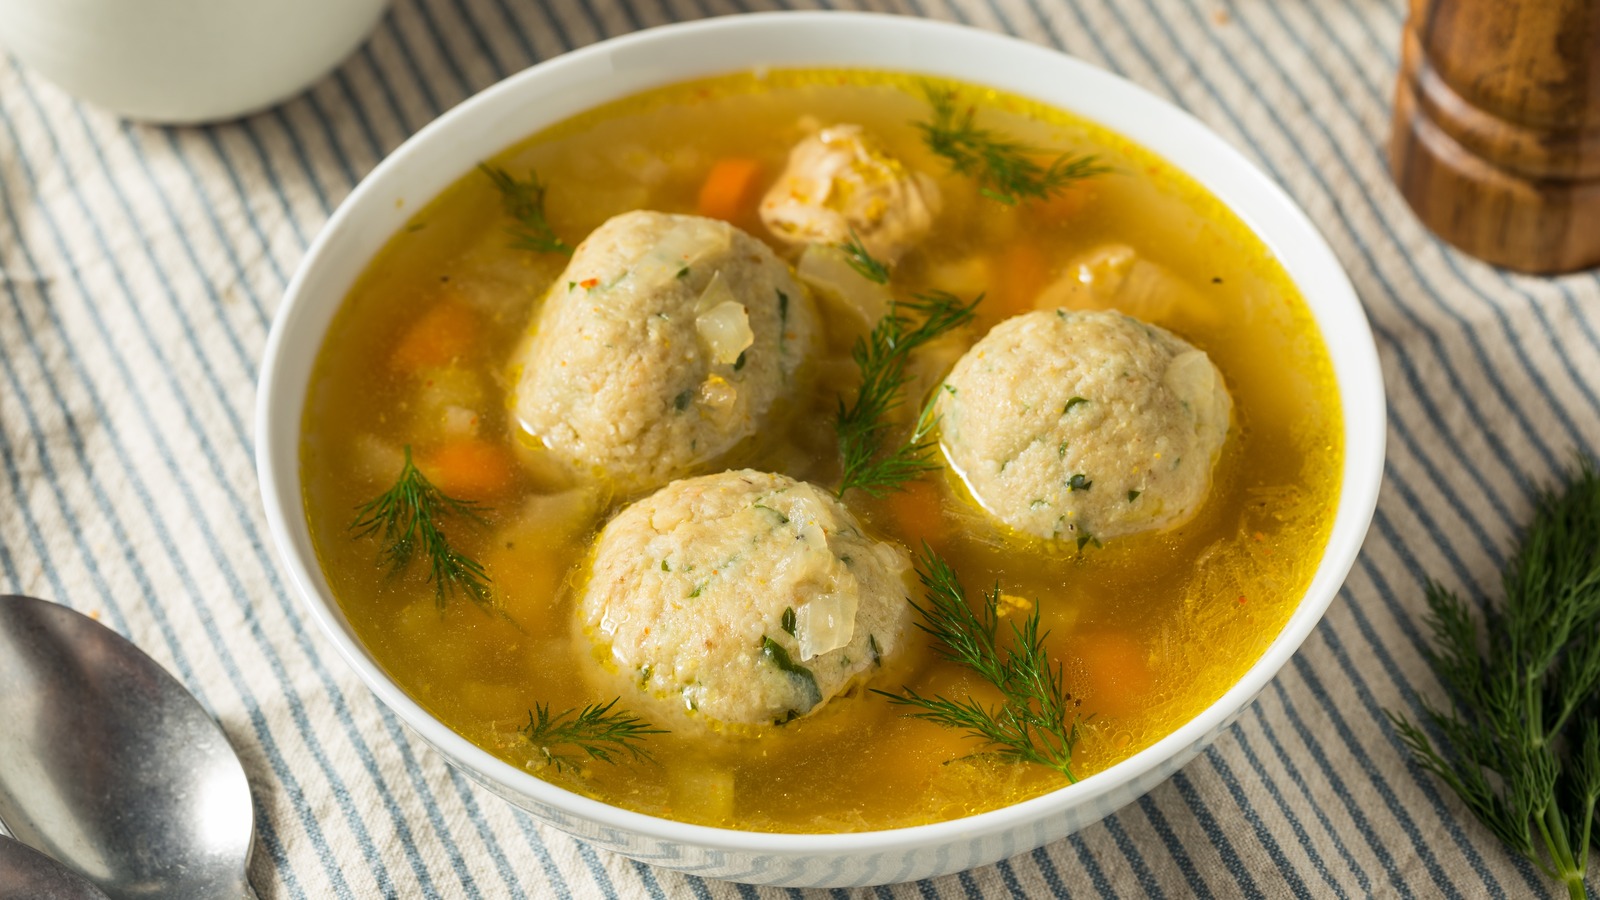 The Unexpected Veggie Mark Strausman Adds To Matzo Ball Soup